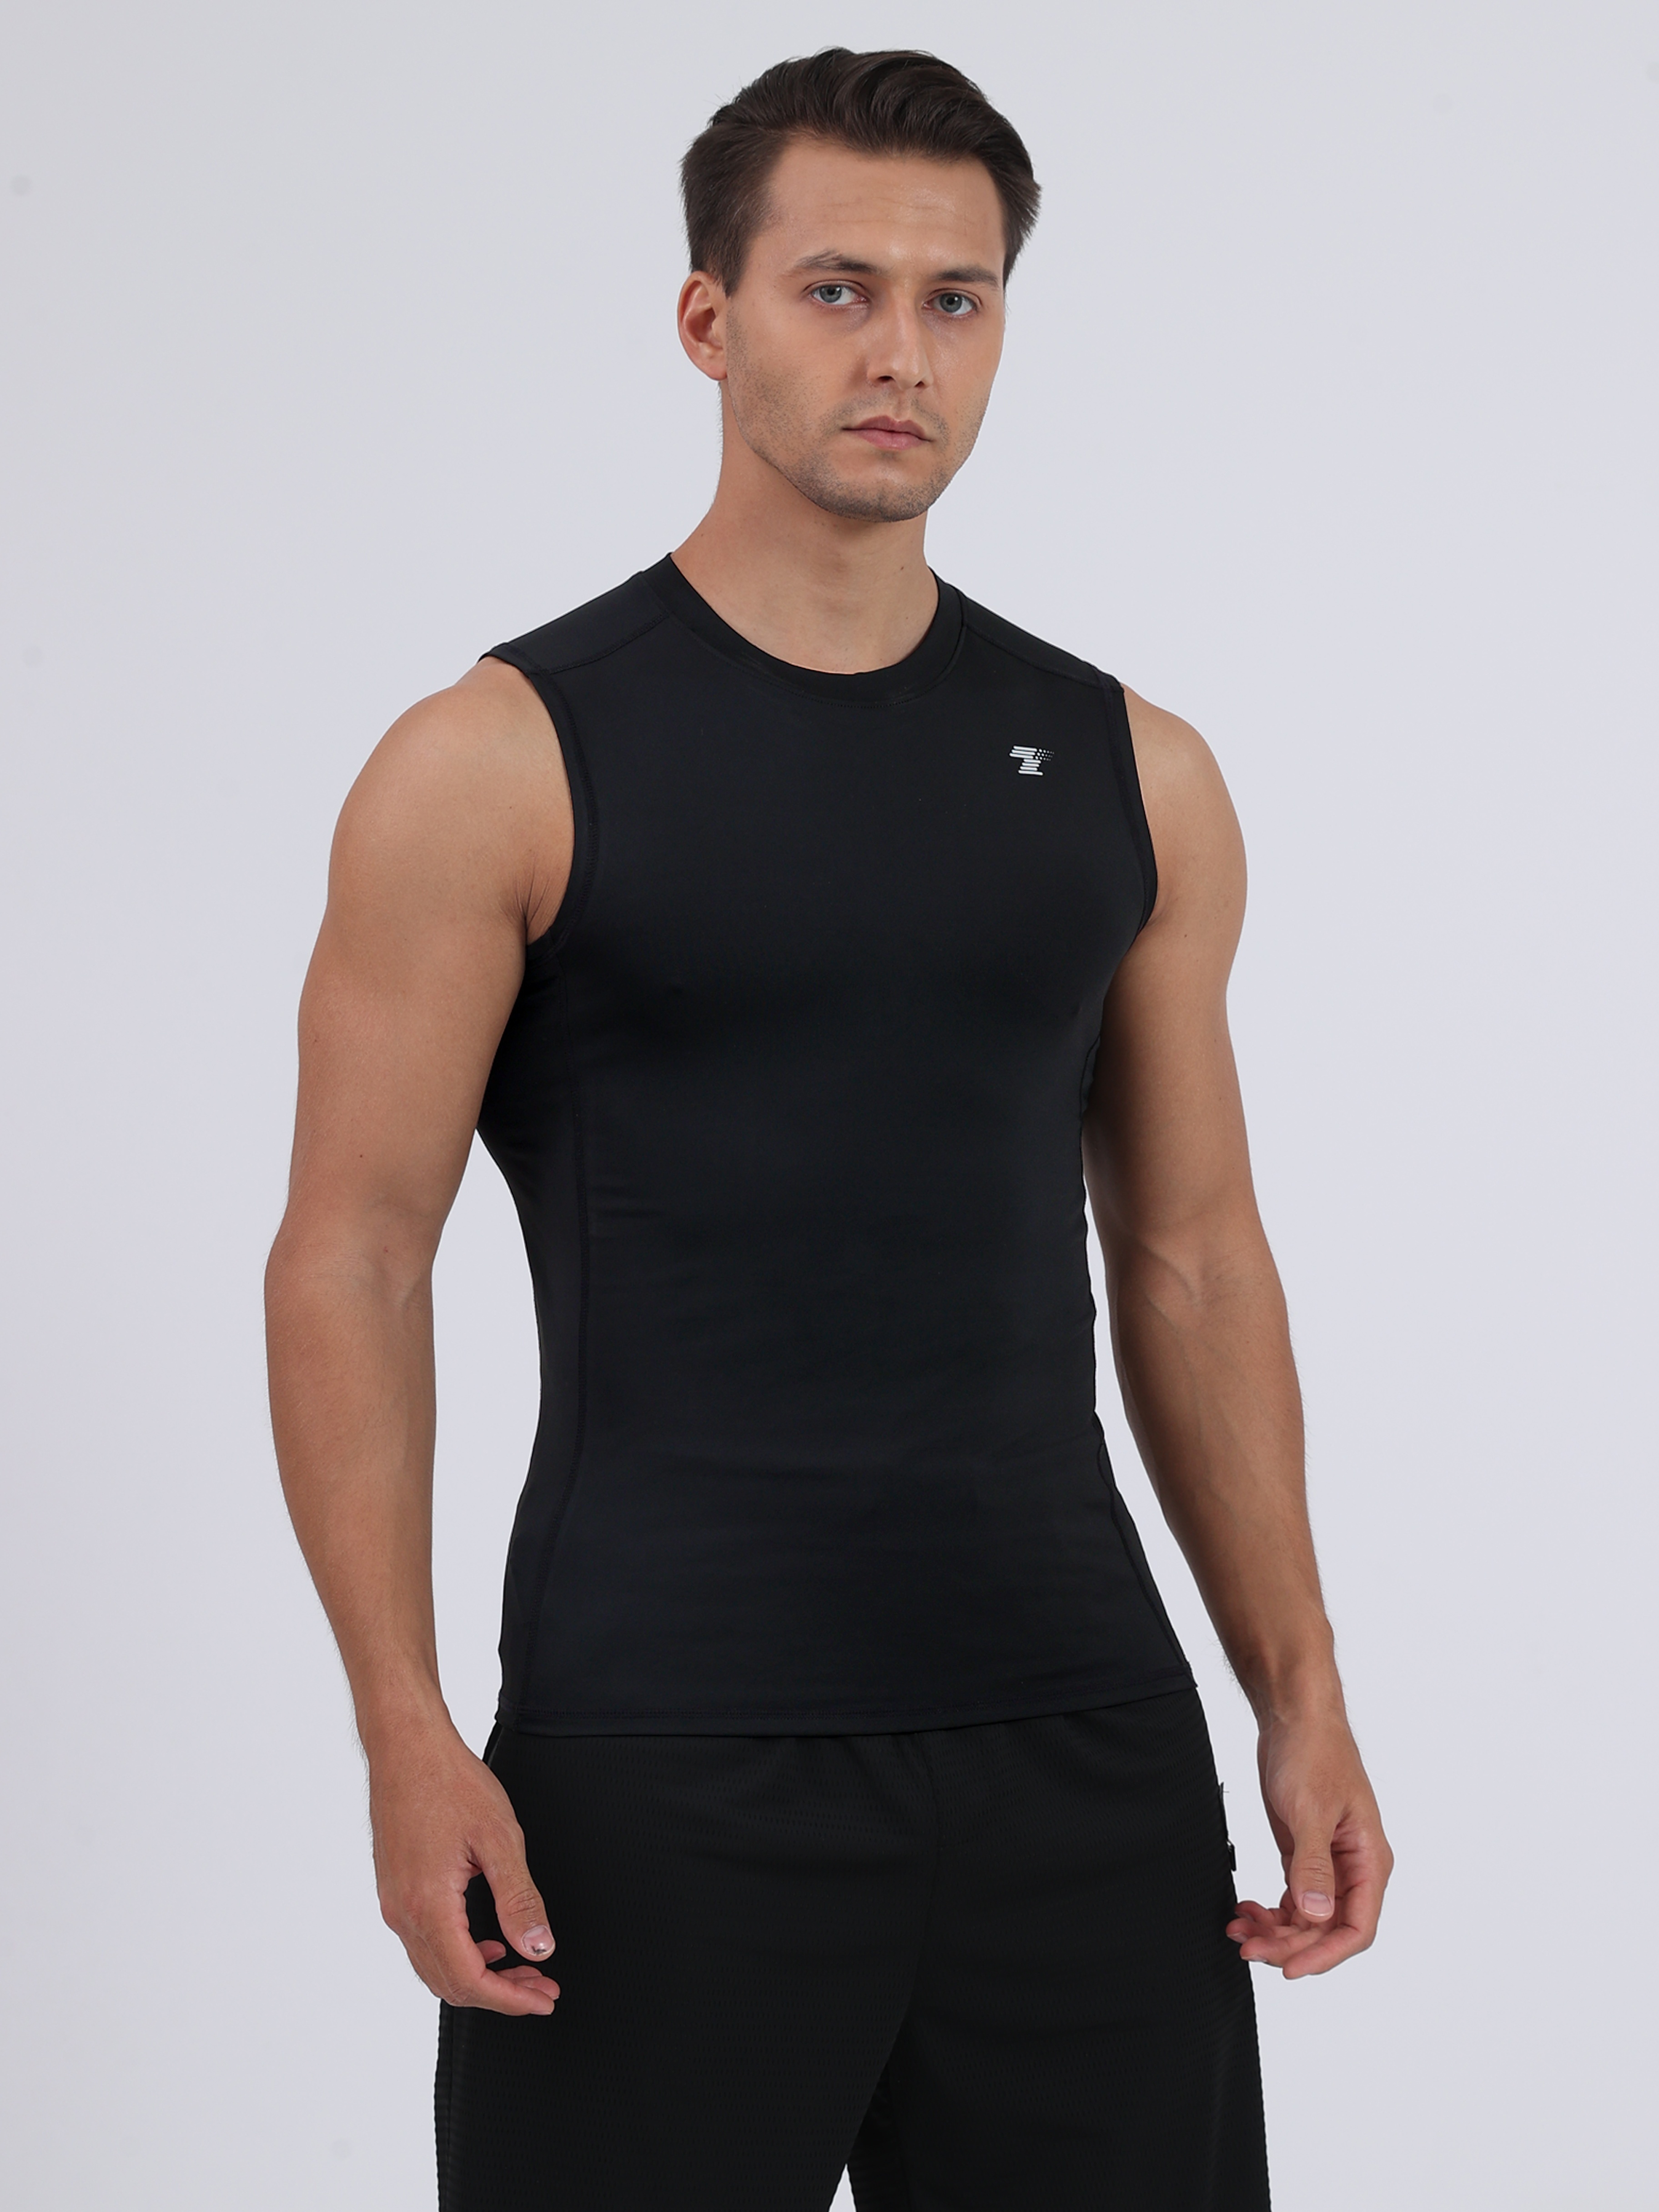 # Men's Compression Workout Gym Running Cool Dry Tank Top Solid Stretchy new